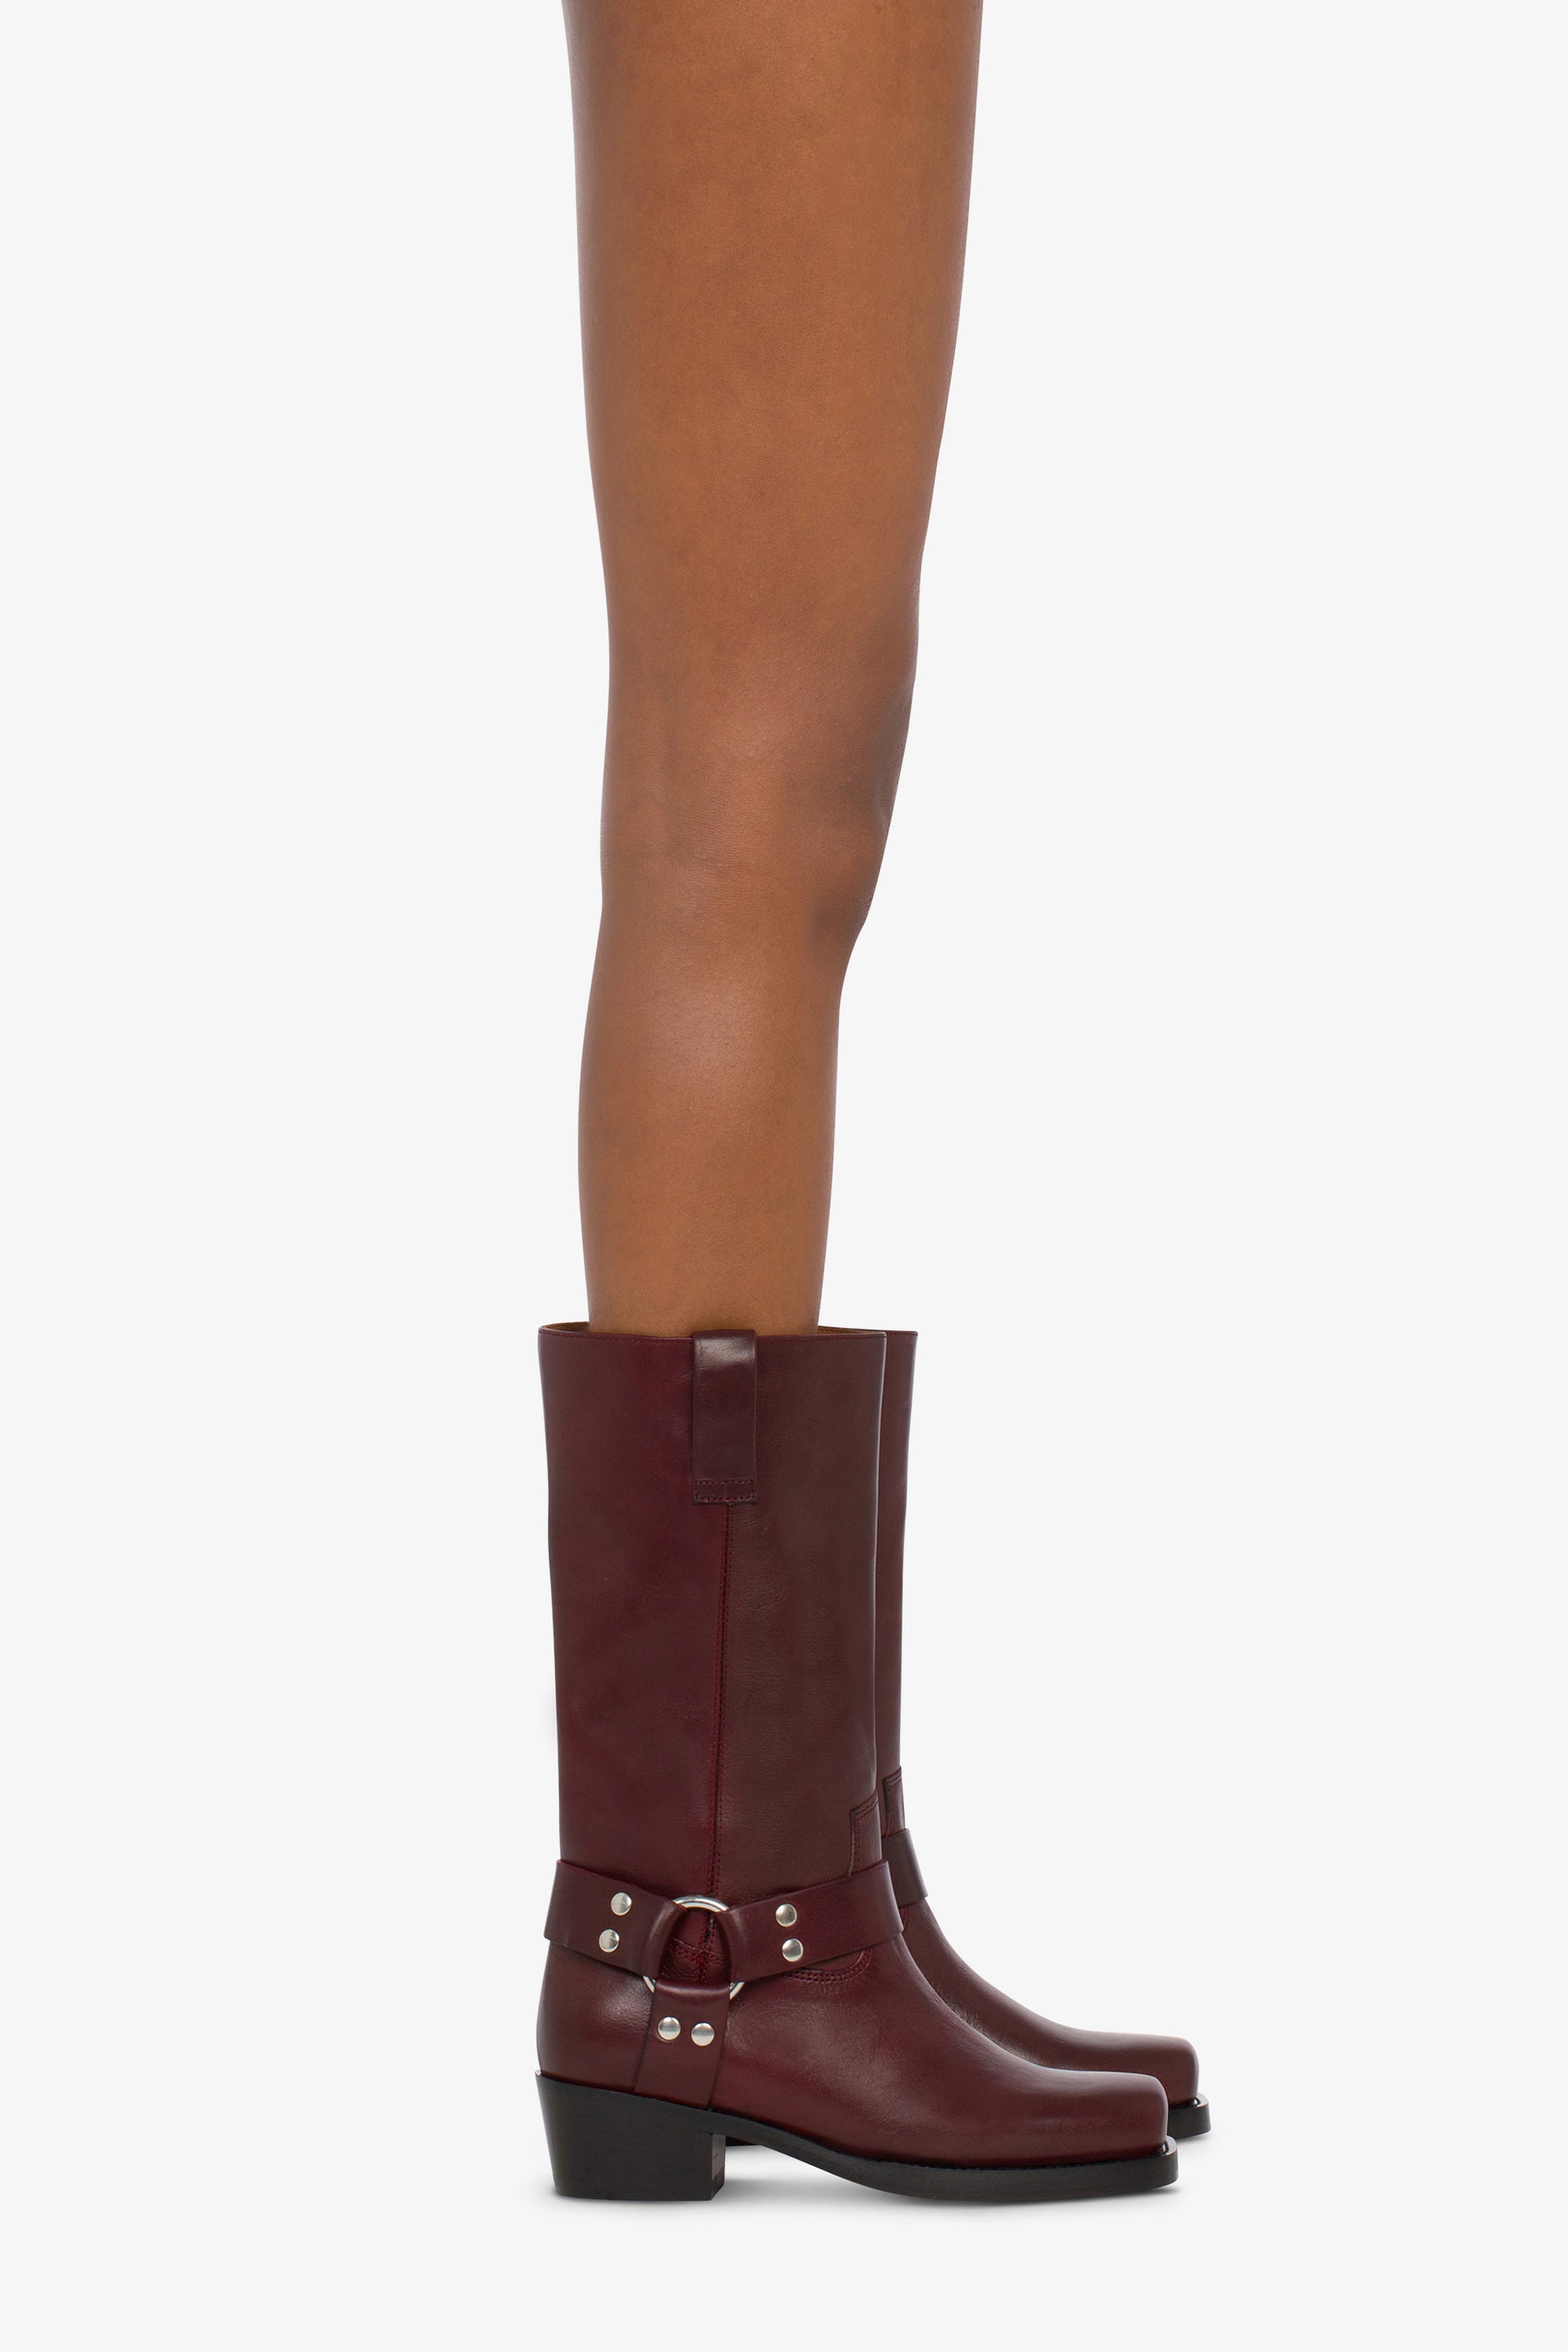 Square-toe boots in smooth plum leather - Producto usado